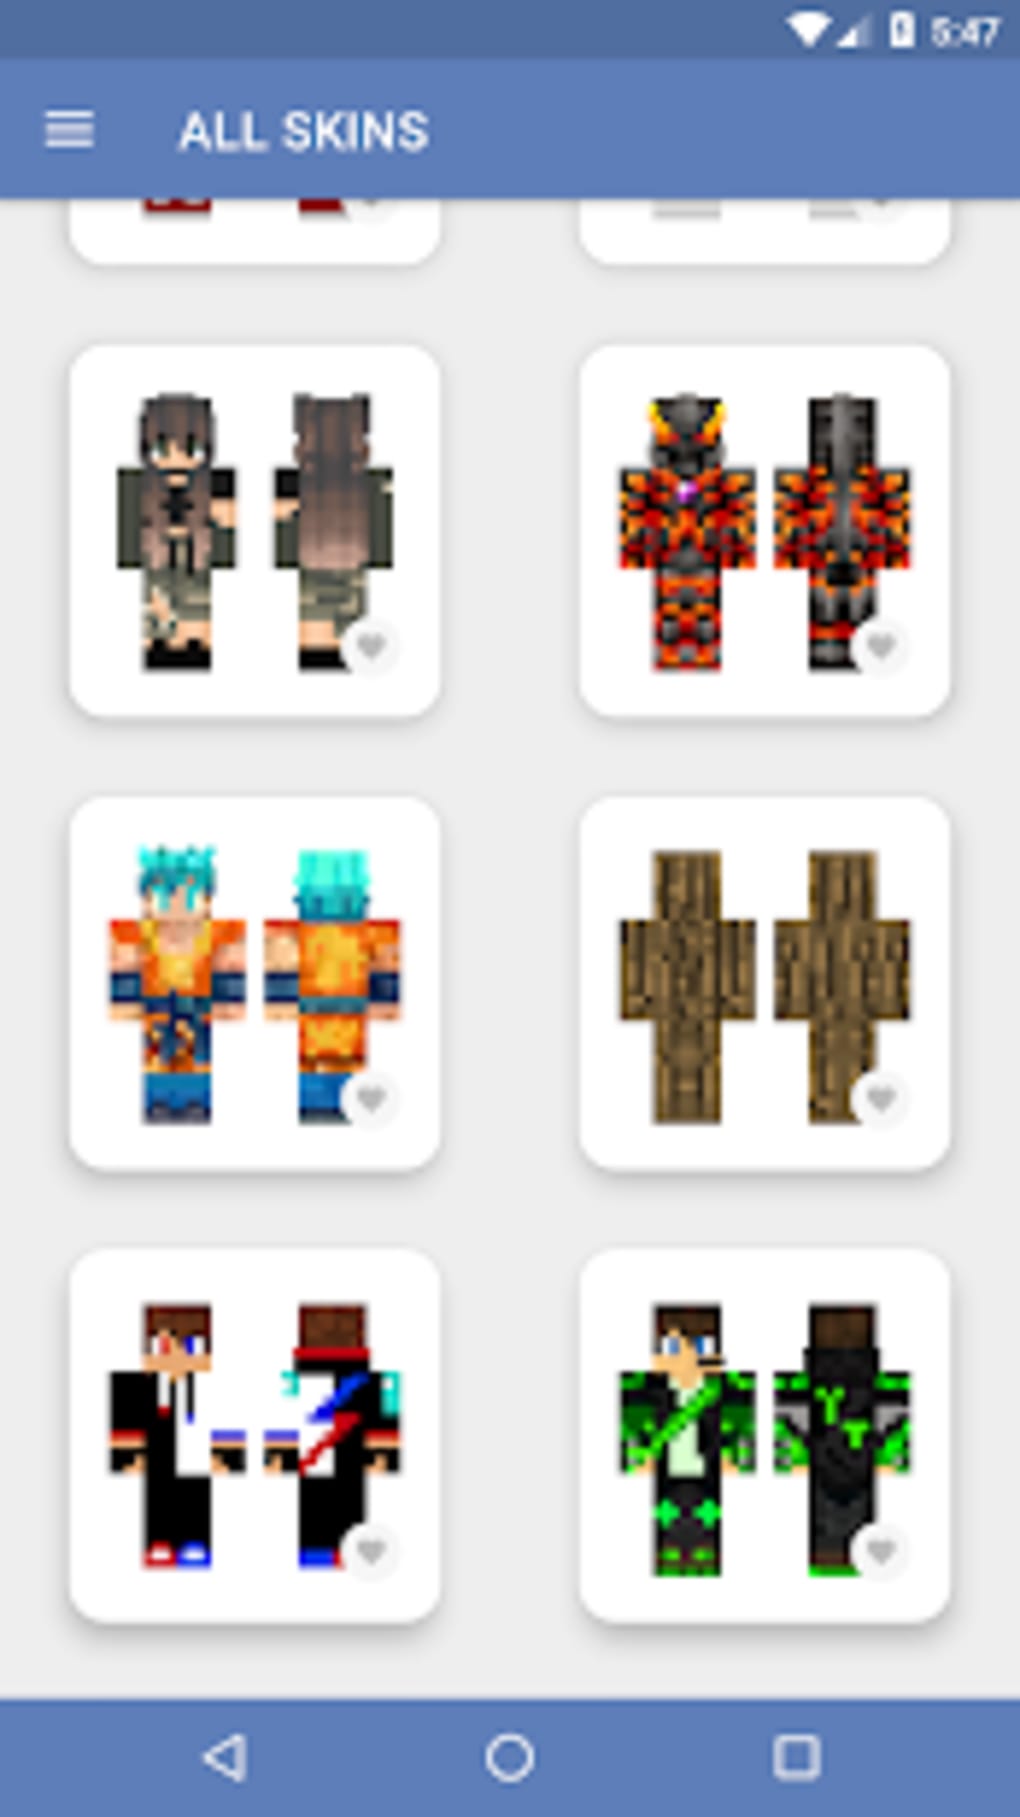 Geleia Skins for Minecraft for Android - Free App Download